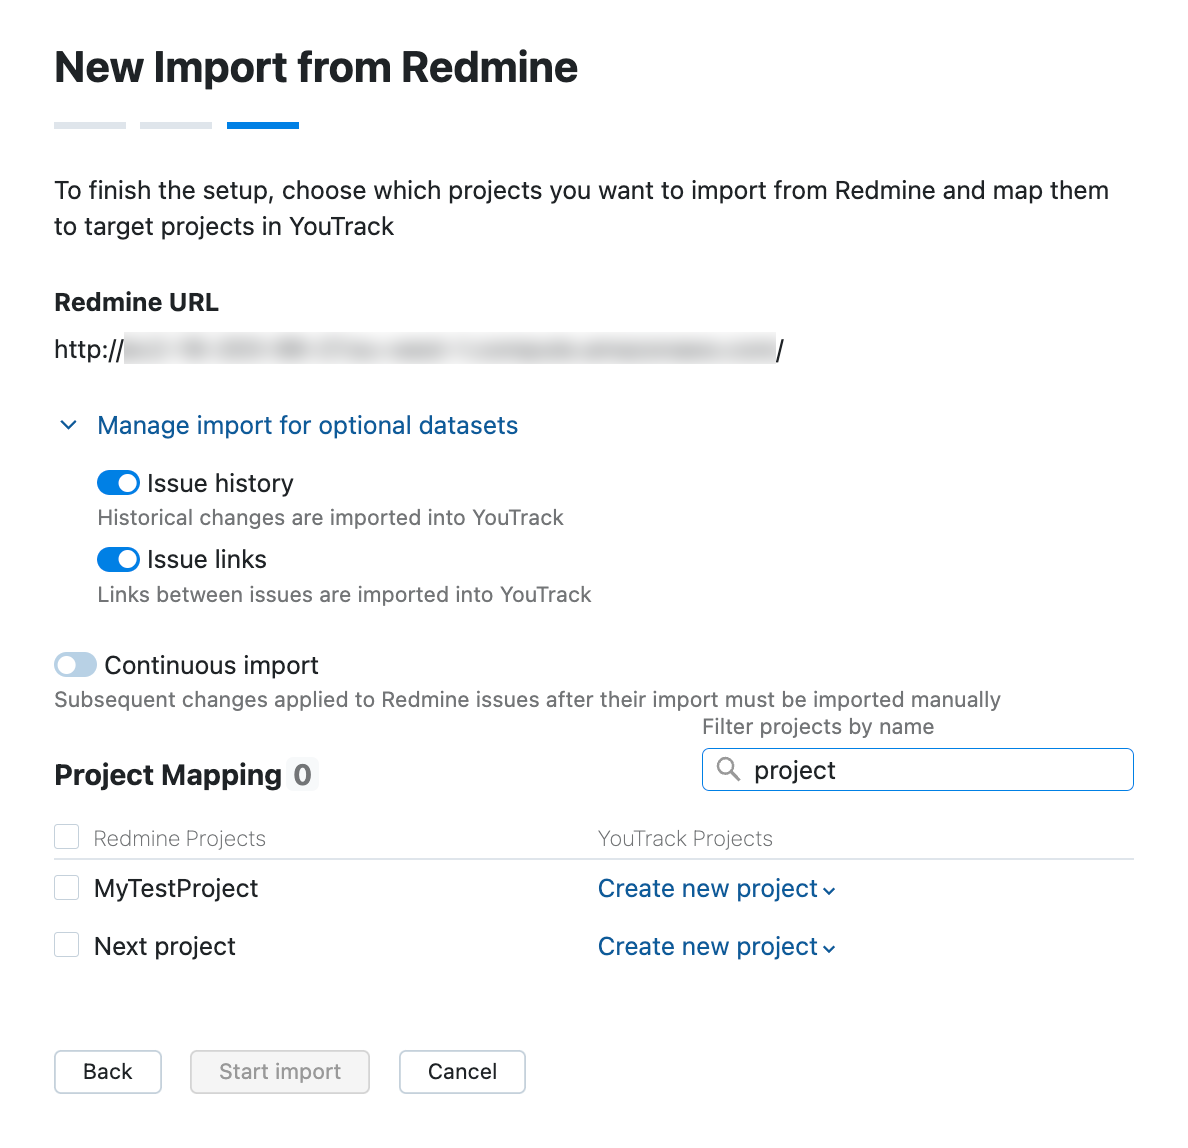 Confirm settings and start import